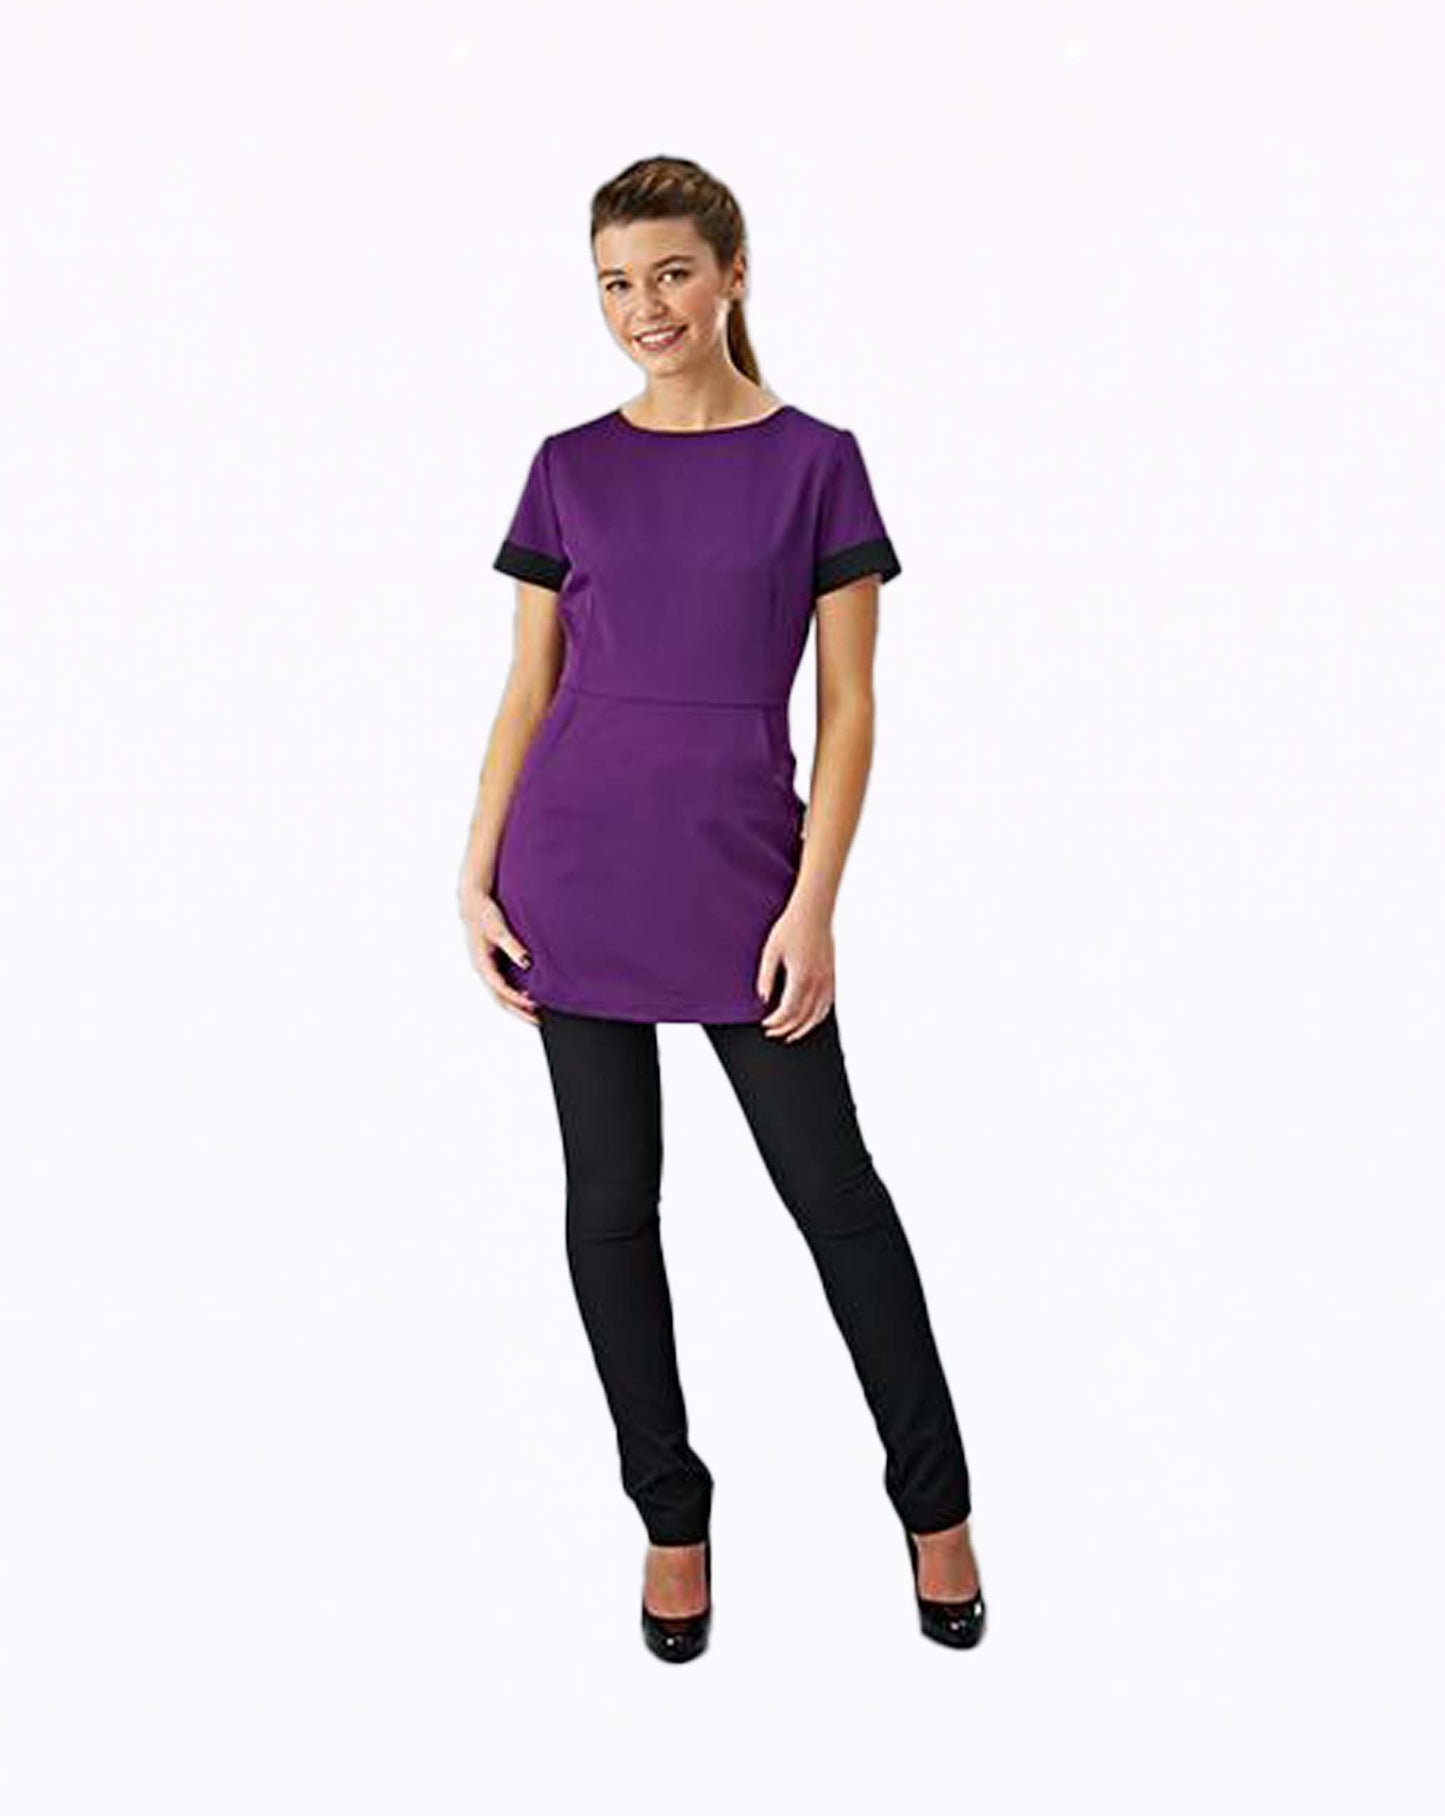 Boutique Tunic with Contrast Trim (Superior Stretch)